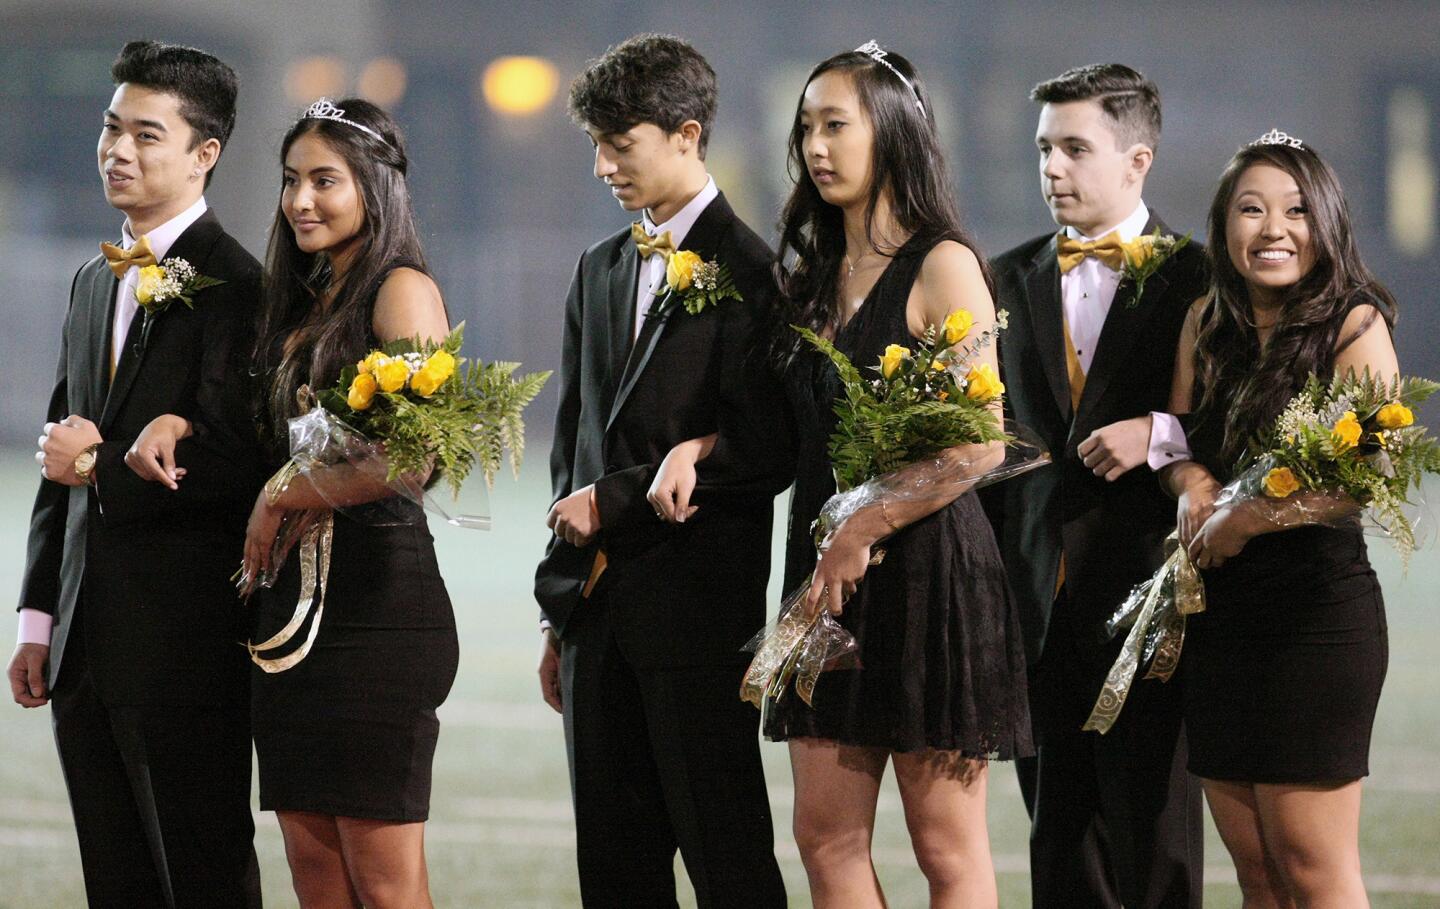 The St. Francis homecoming court lines up during halftime on Friday, October 30, 2015.